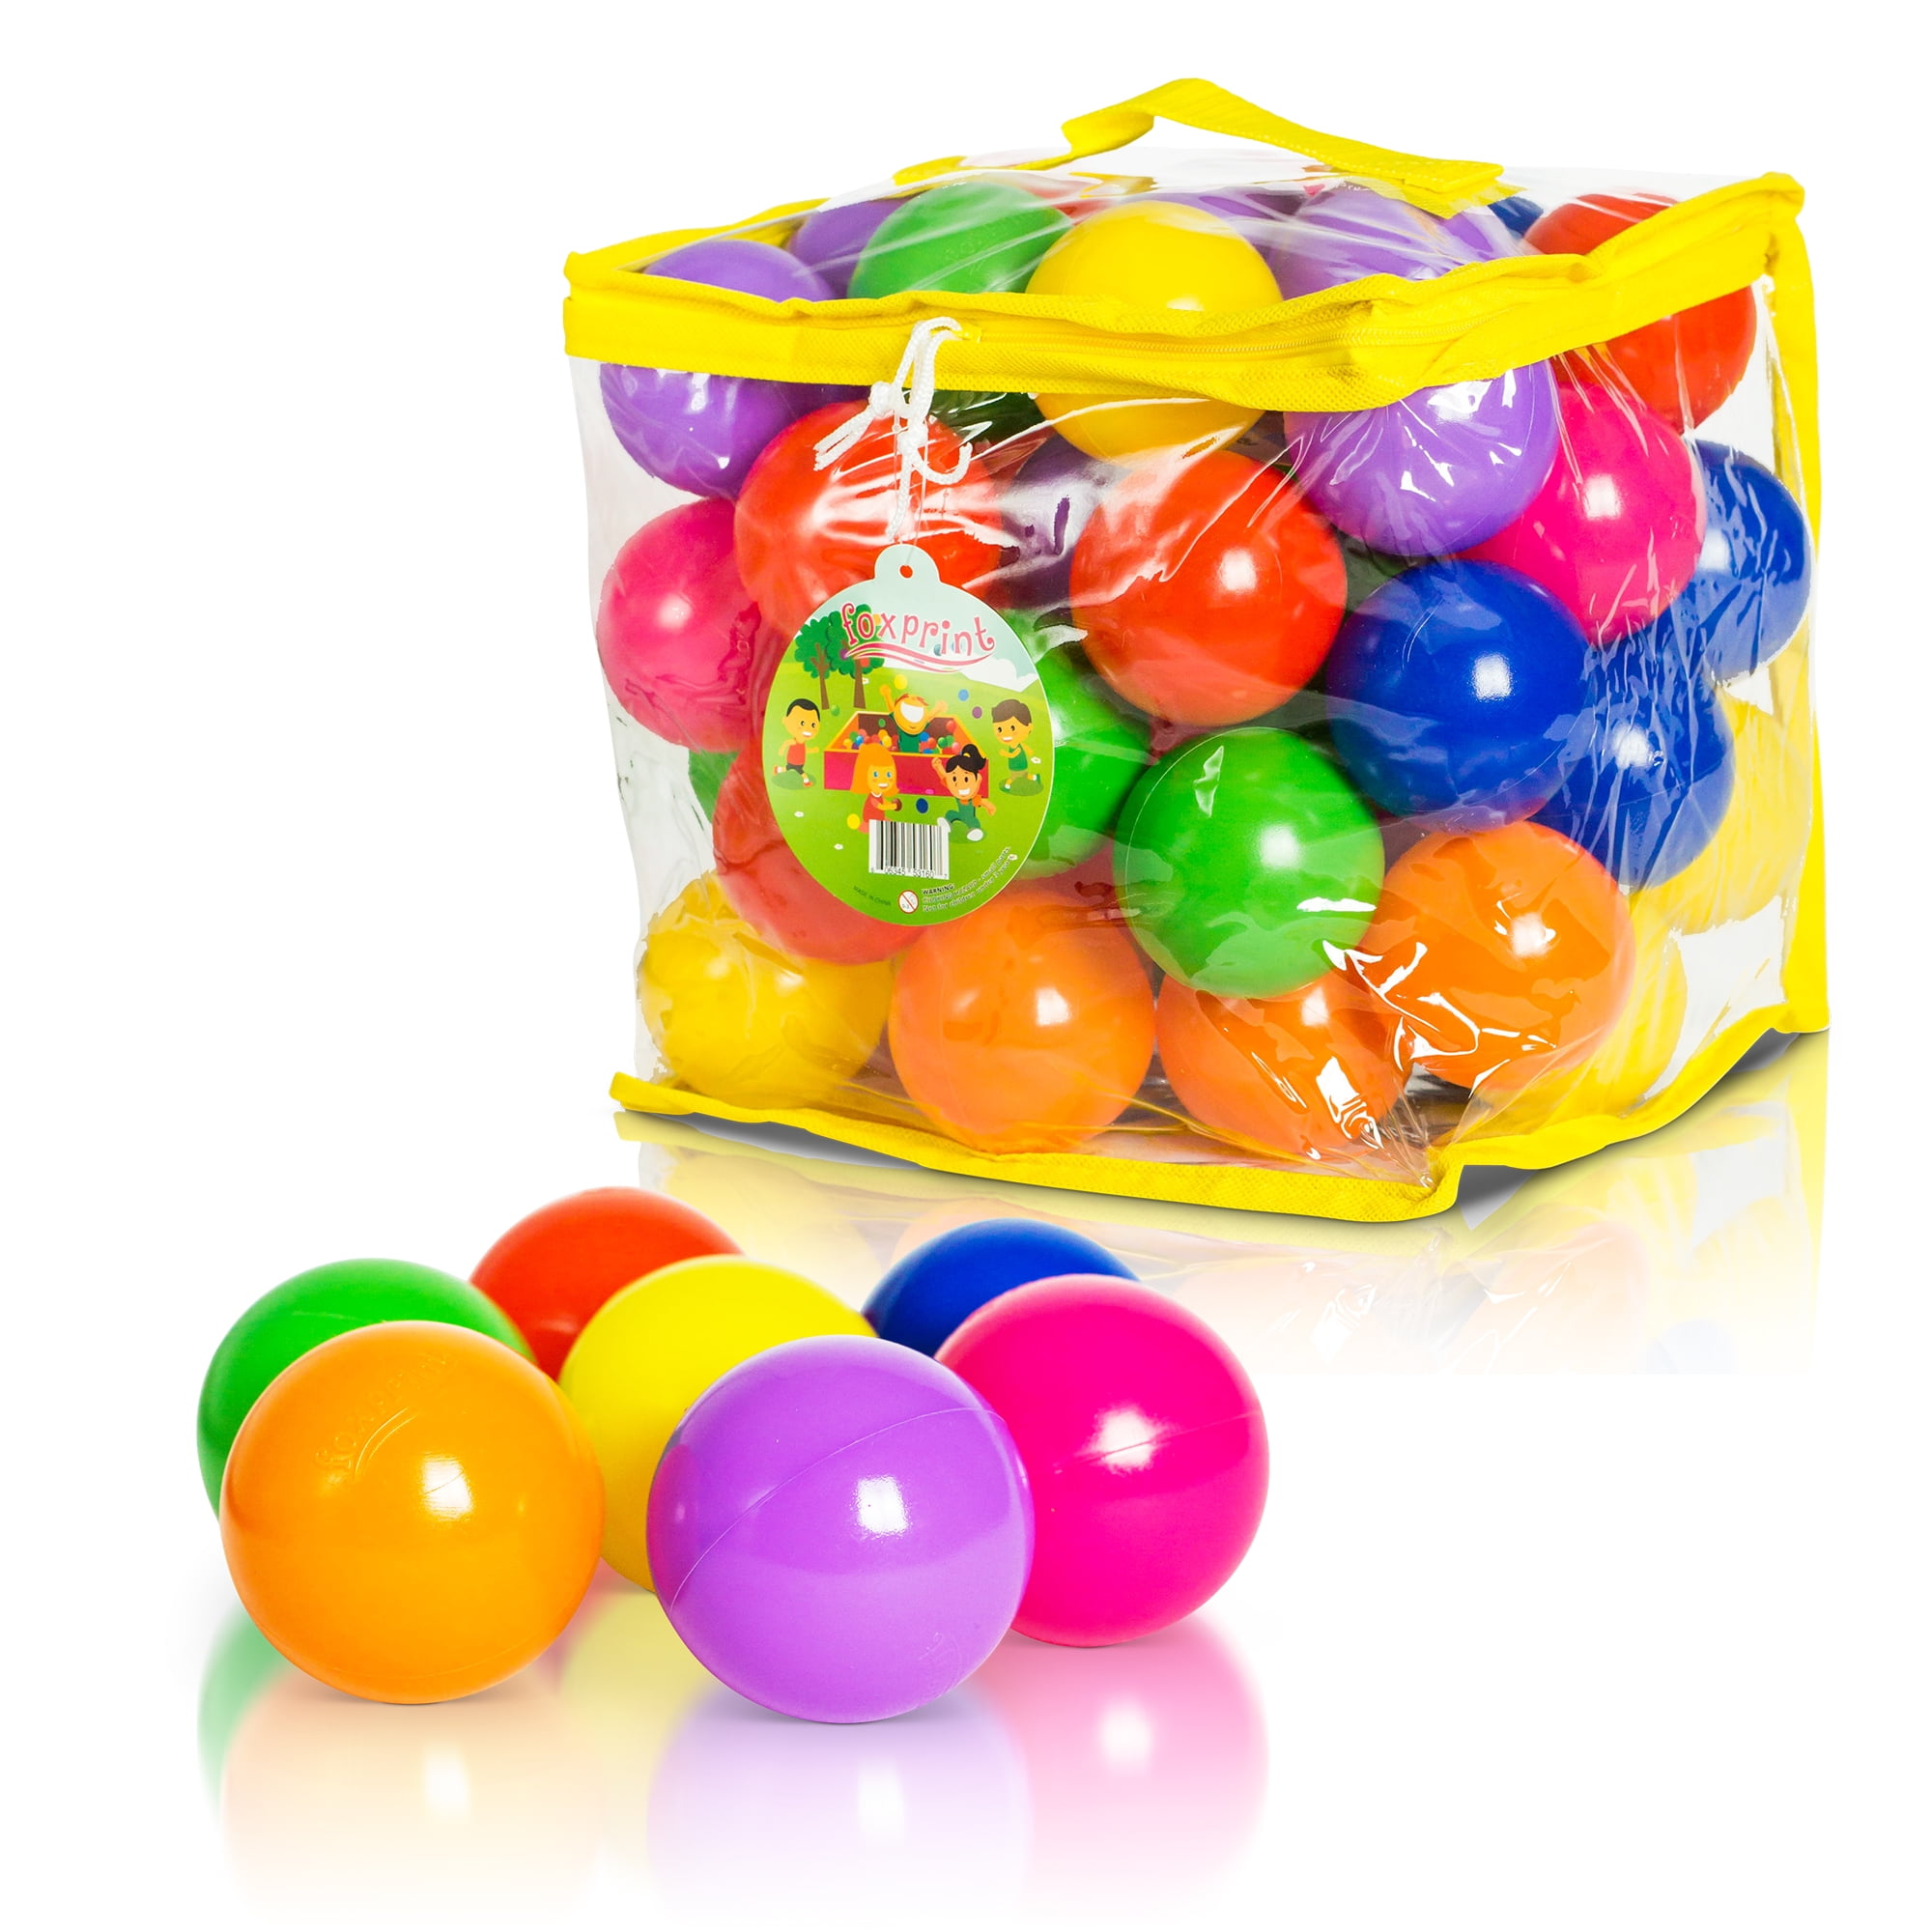 50 Pieces 4cm Safety Ocean Pit Balls Stress Balls for Kids Playhouse Pool 